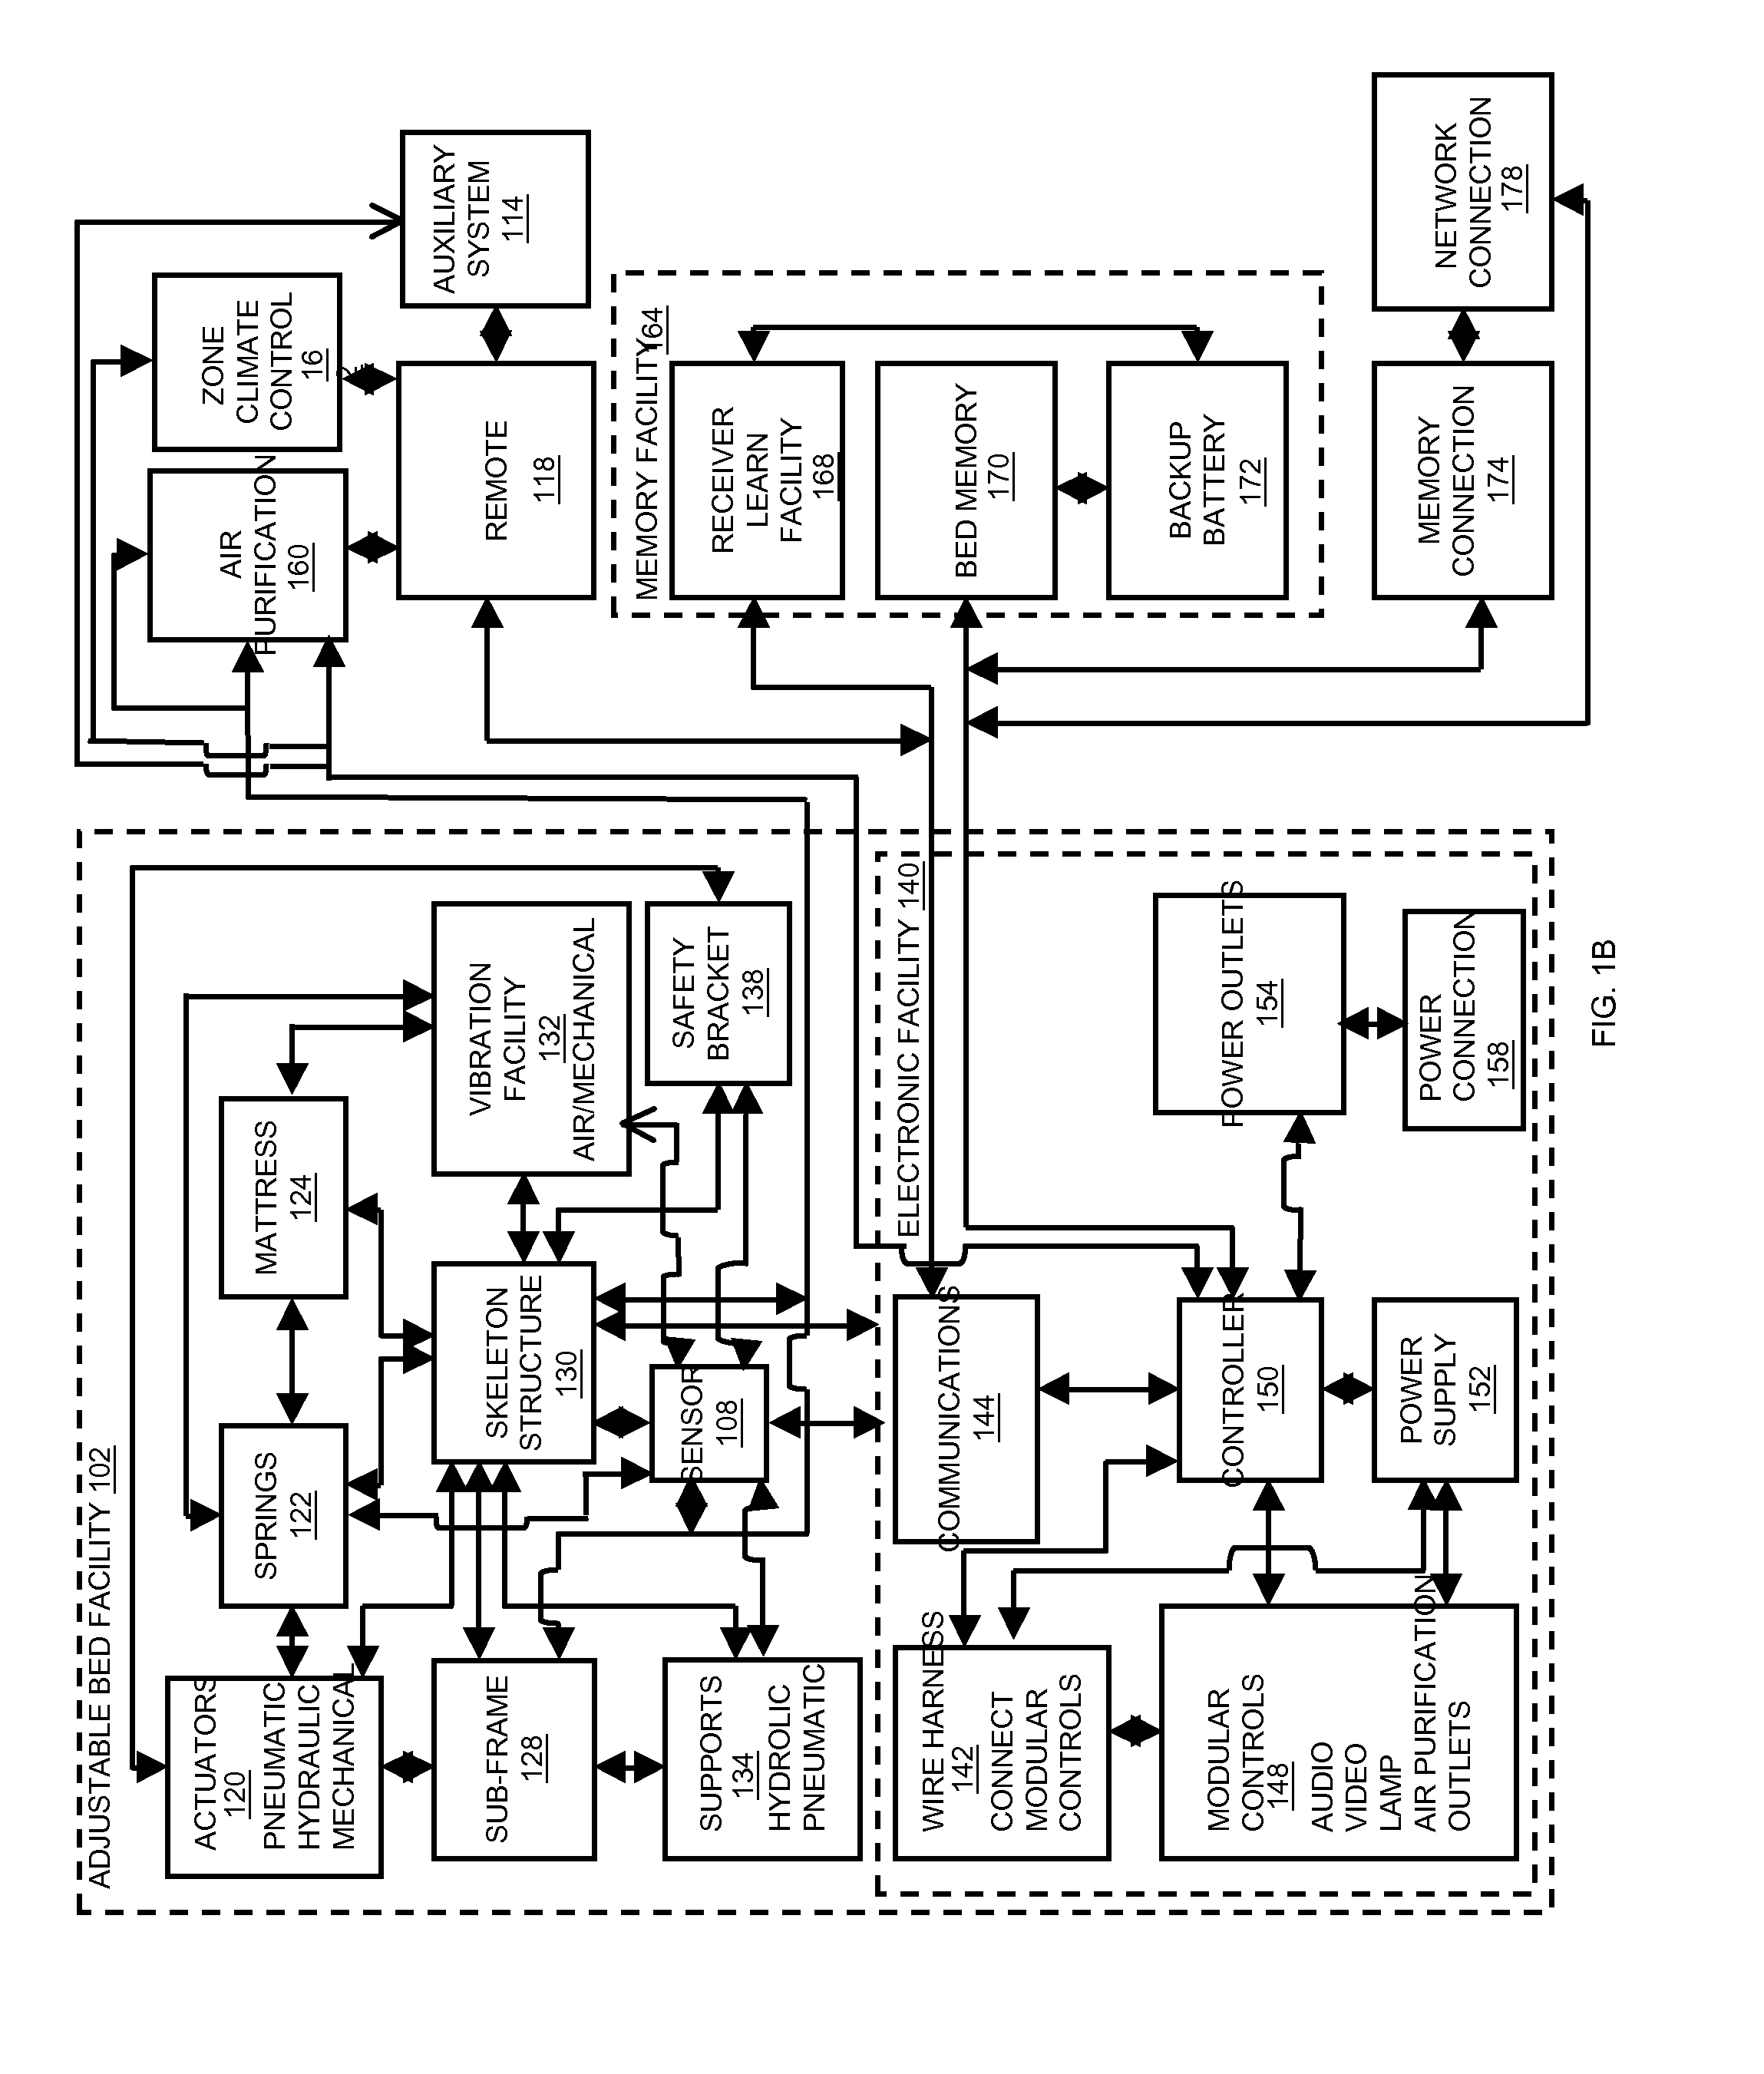 System of adjustable bed control via a home network